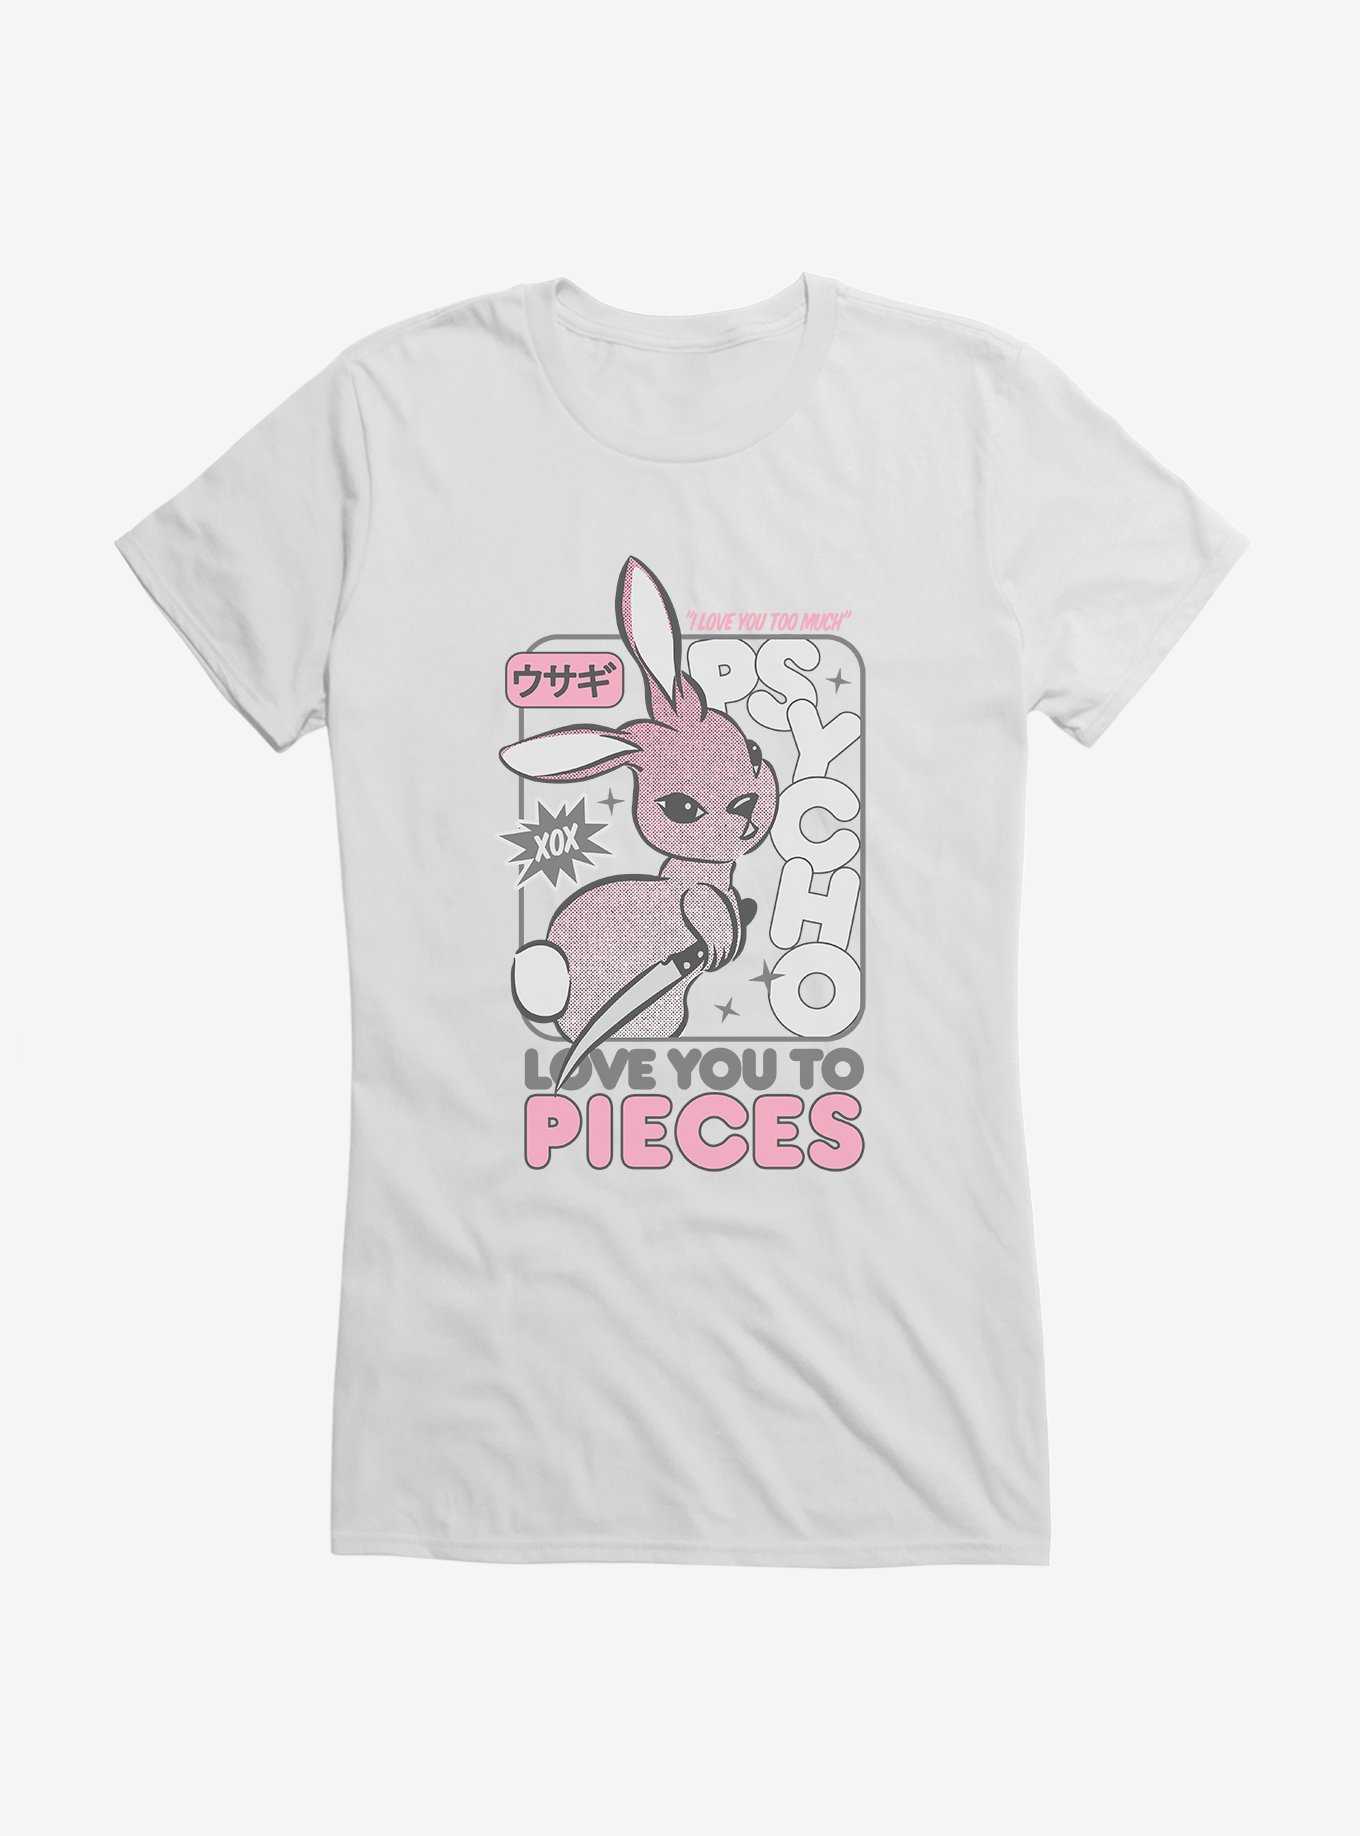 Knife Animals Love You To Pieces Girls T-Shirt, , hi-res